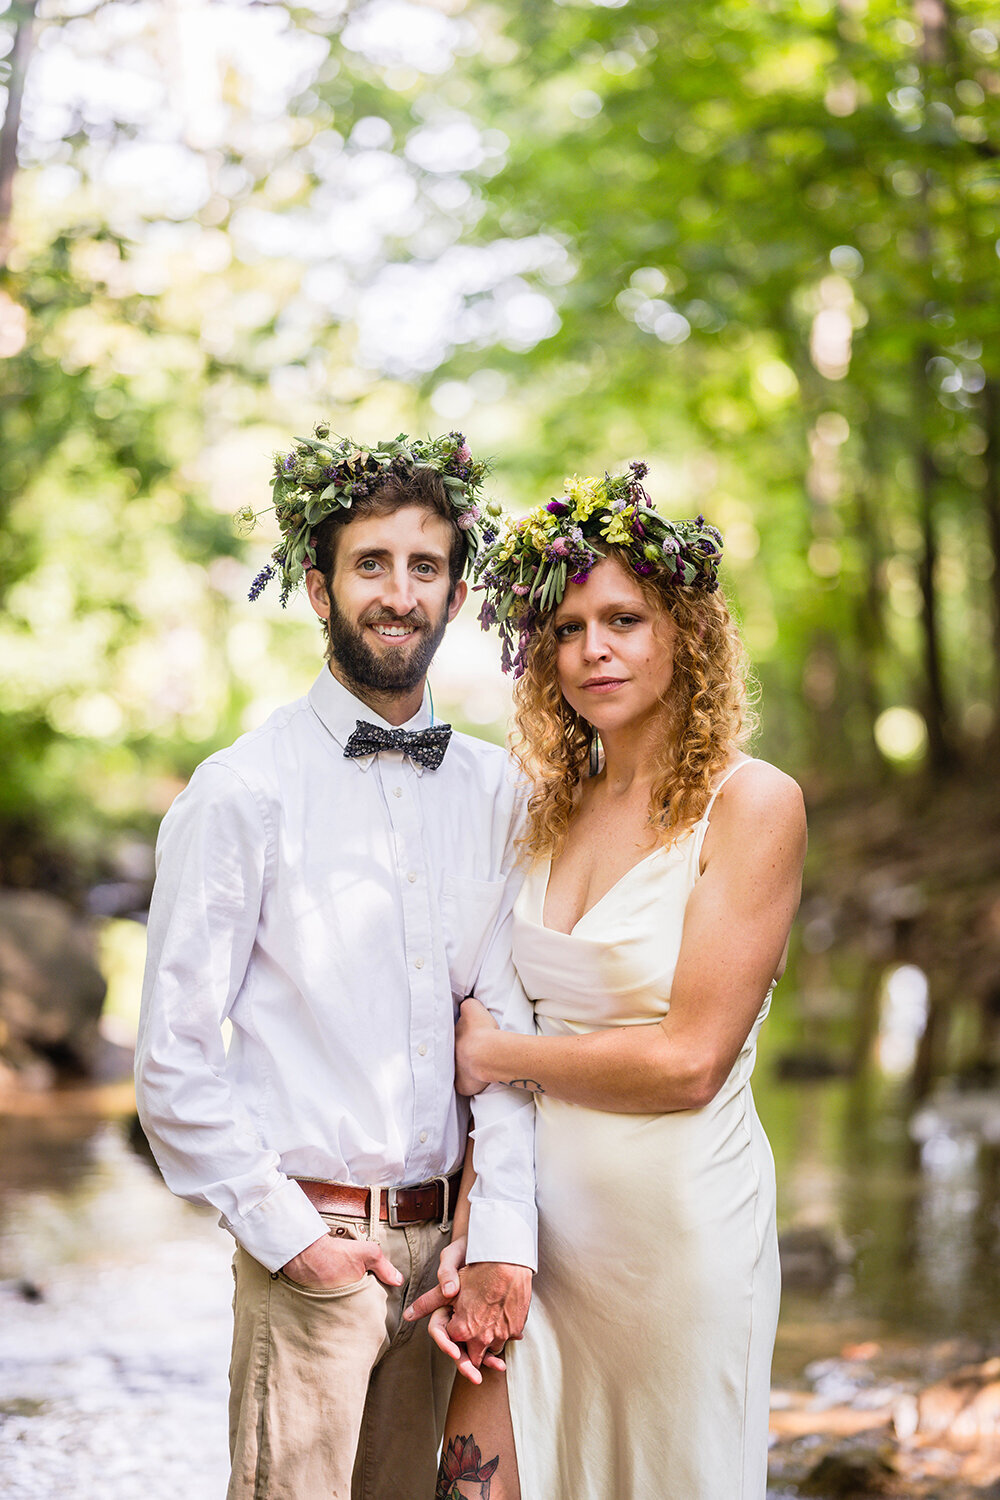 A newlywed couple holds hands and smiles for a formal portrait at Fishburn Park on their elopement day in Roanoke, Virginia.